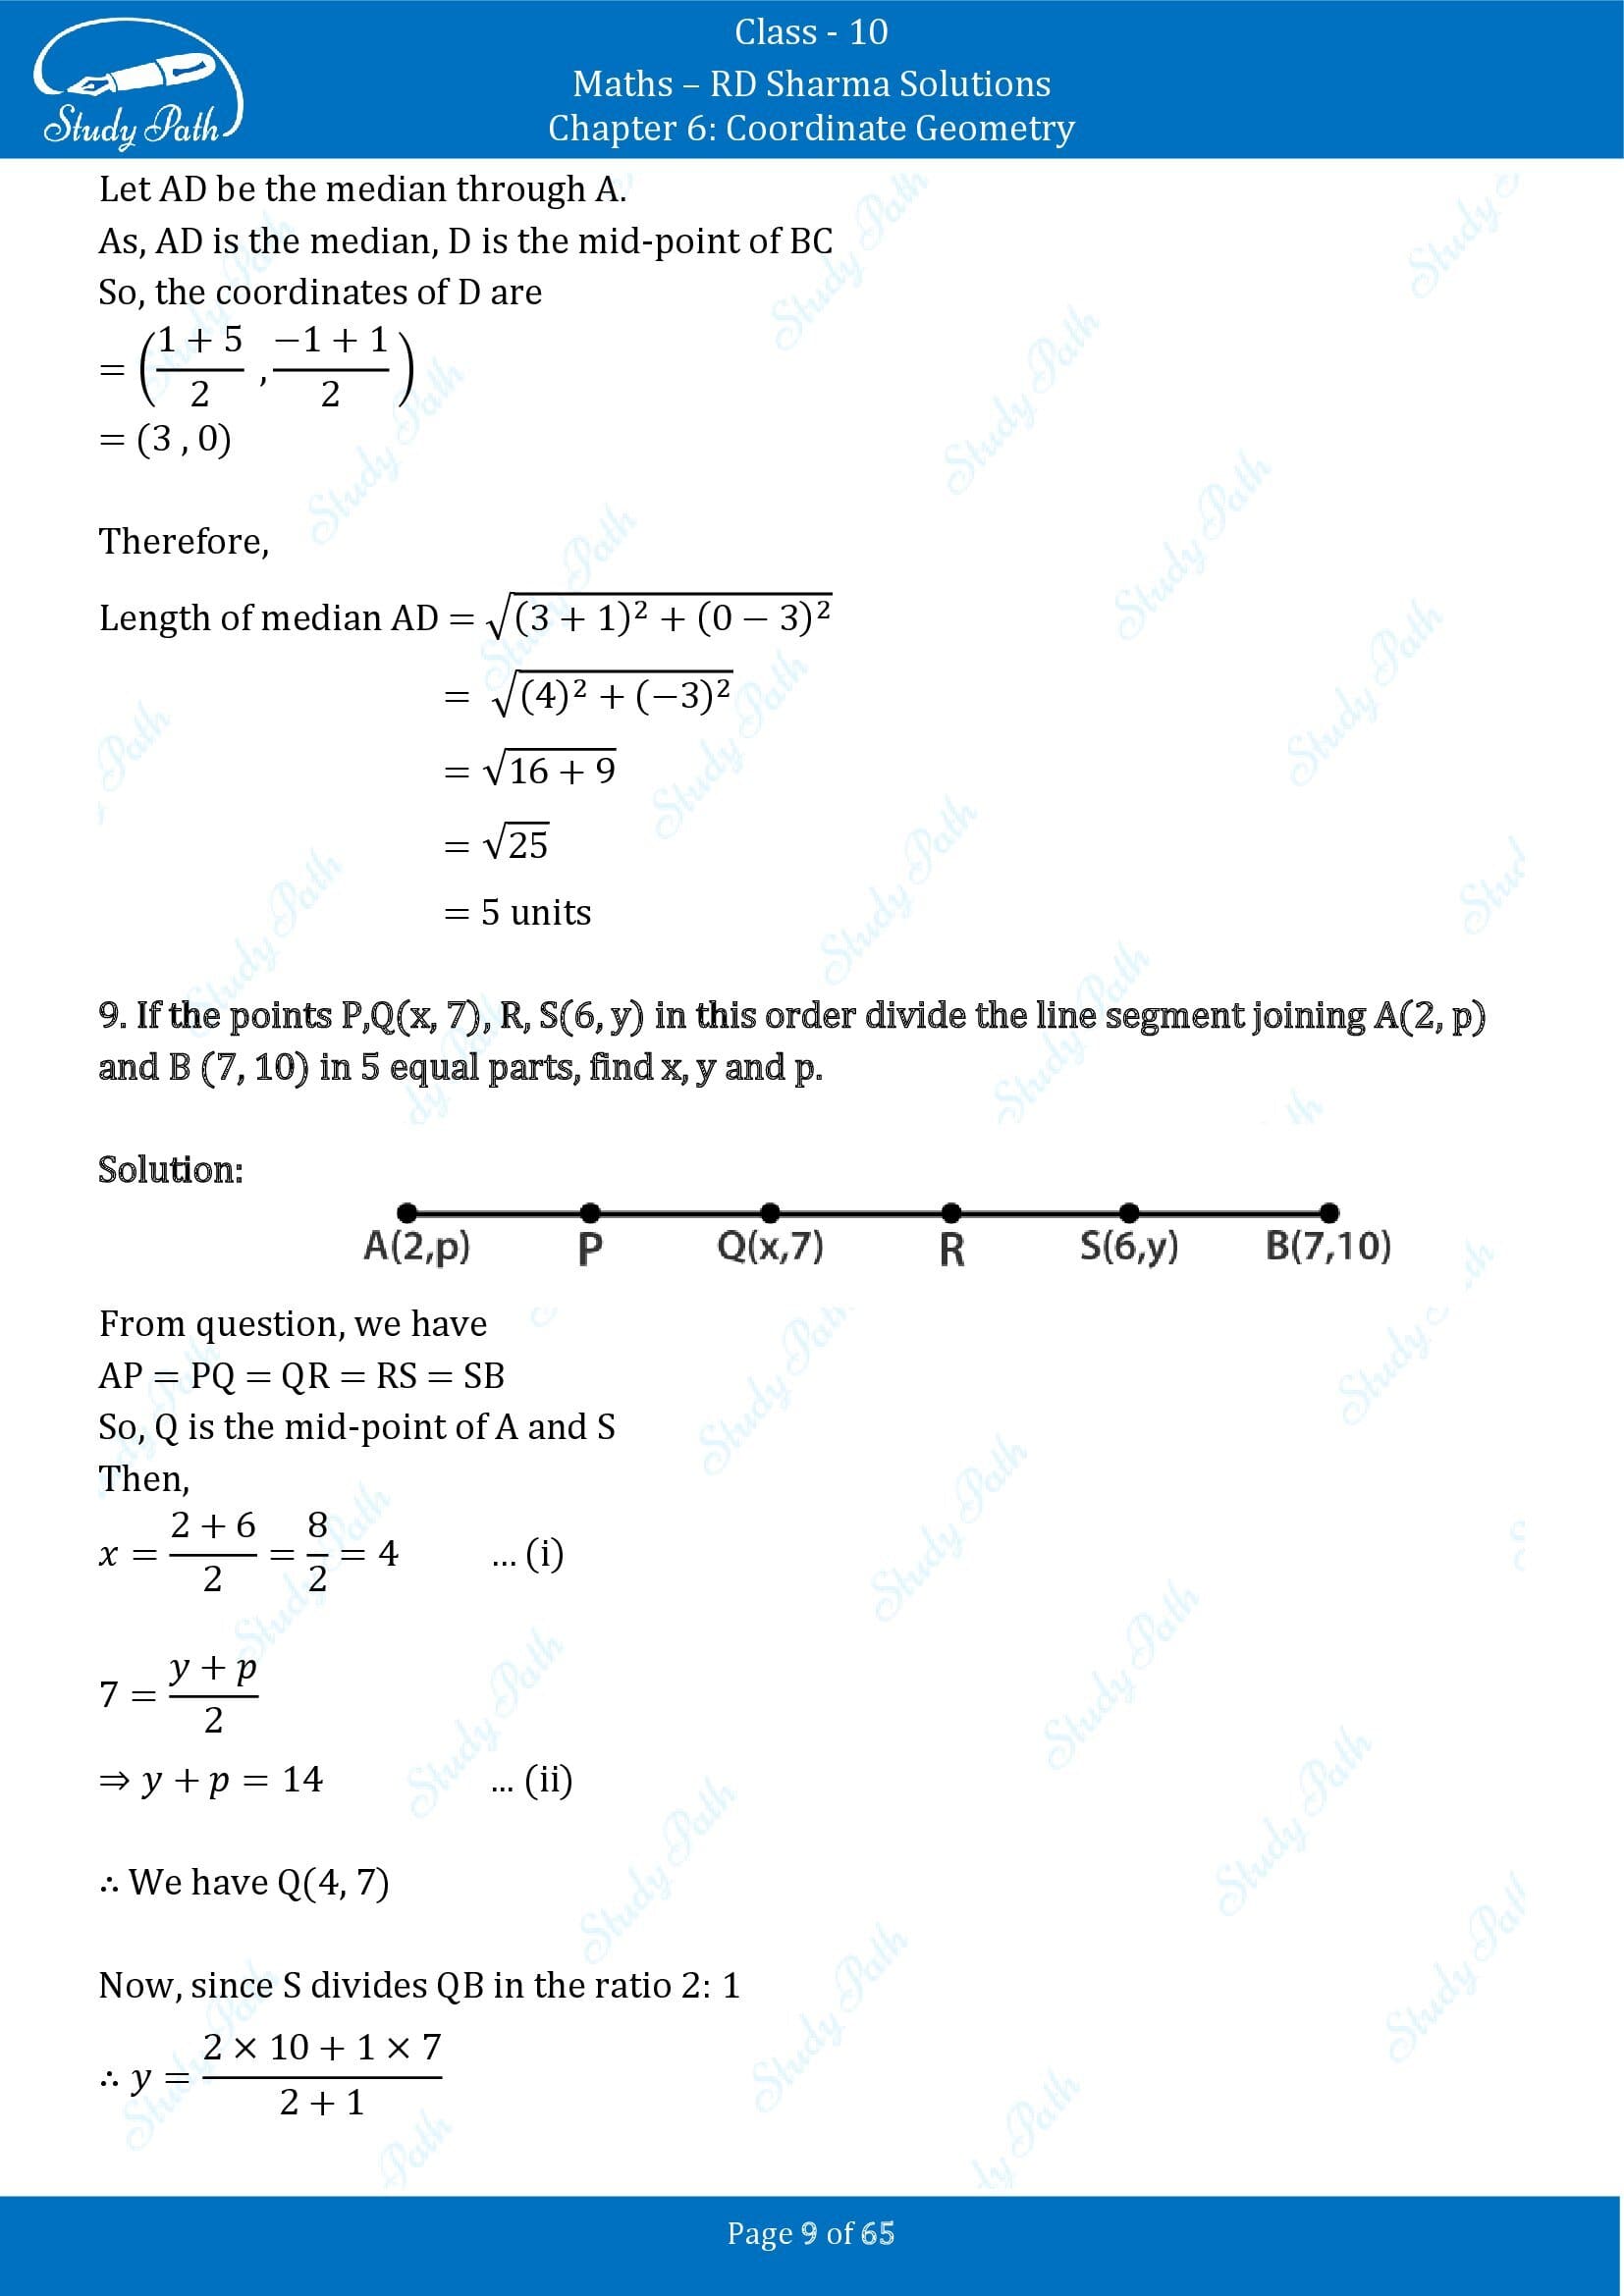 RD Sharma Solutions Class 10 Chapter 6 Coordinate Geometry Exercise 6.3 00009